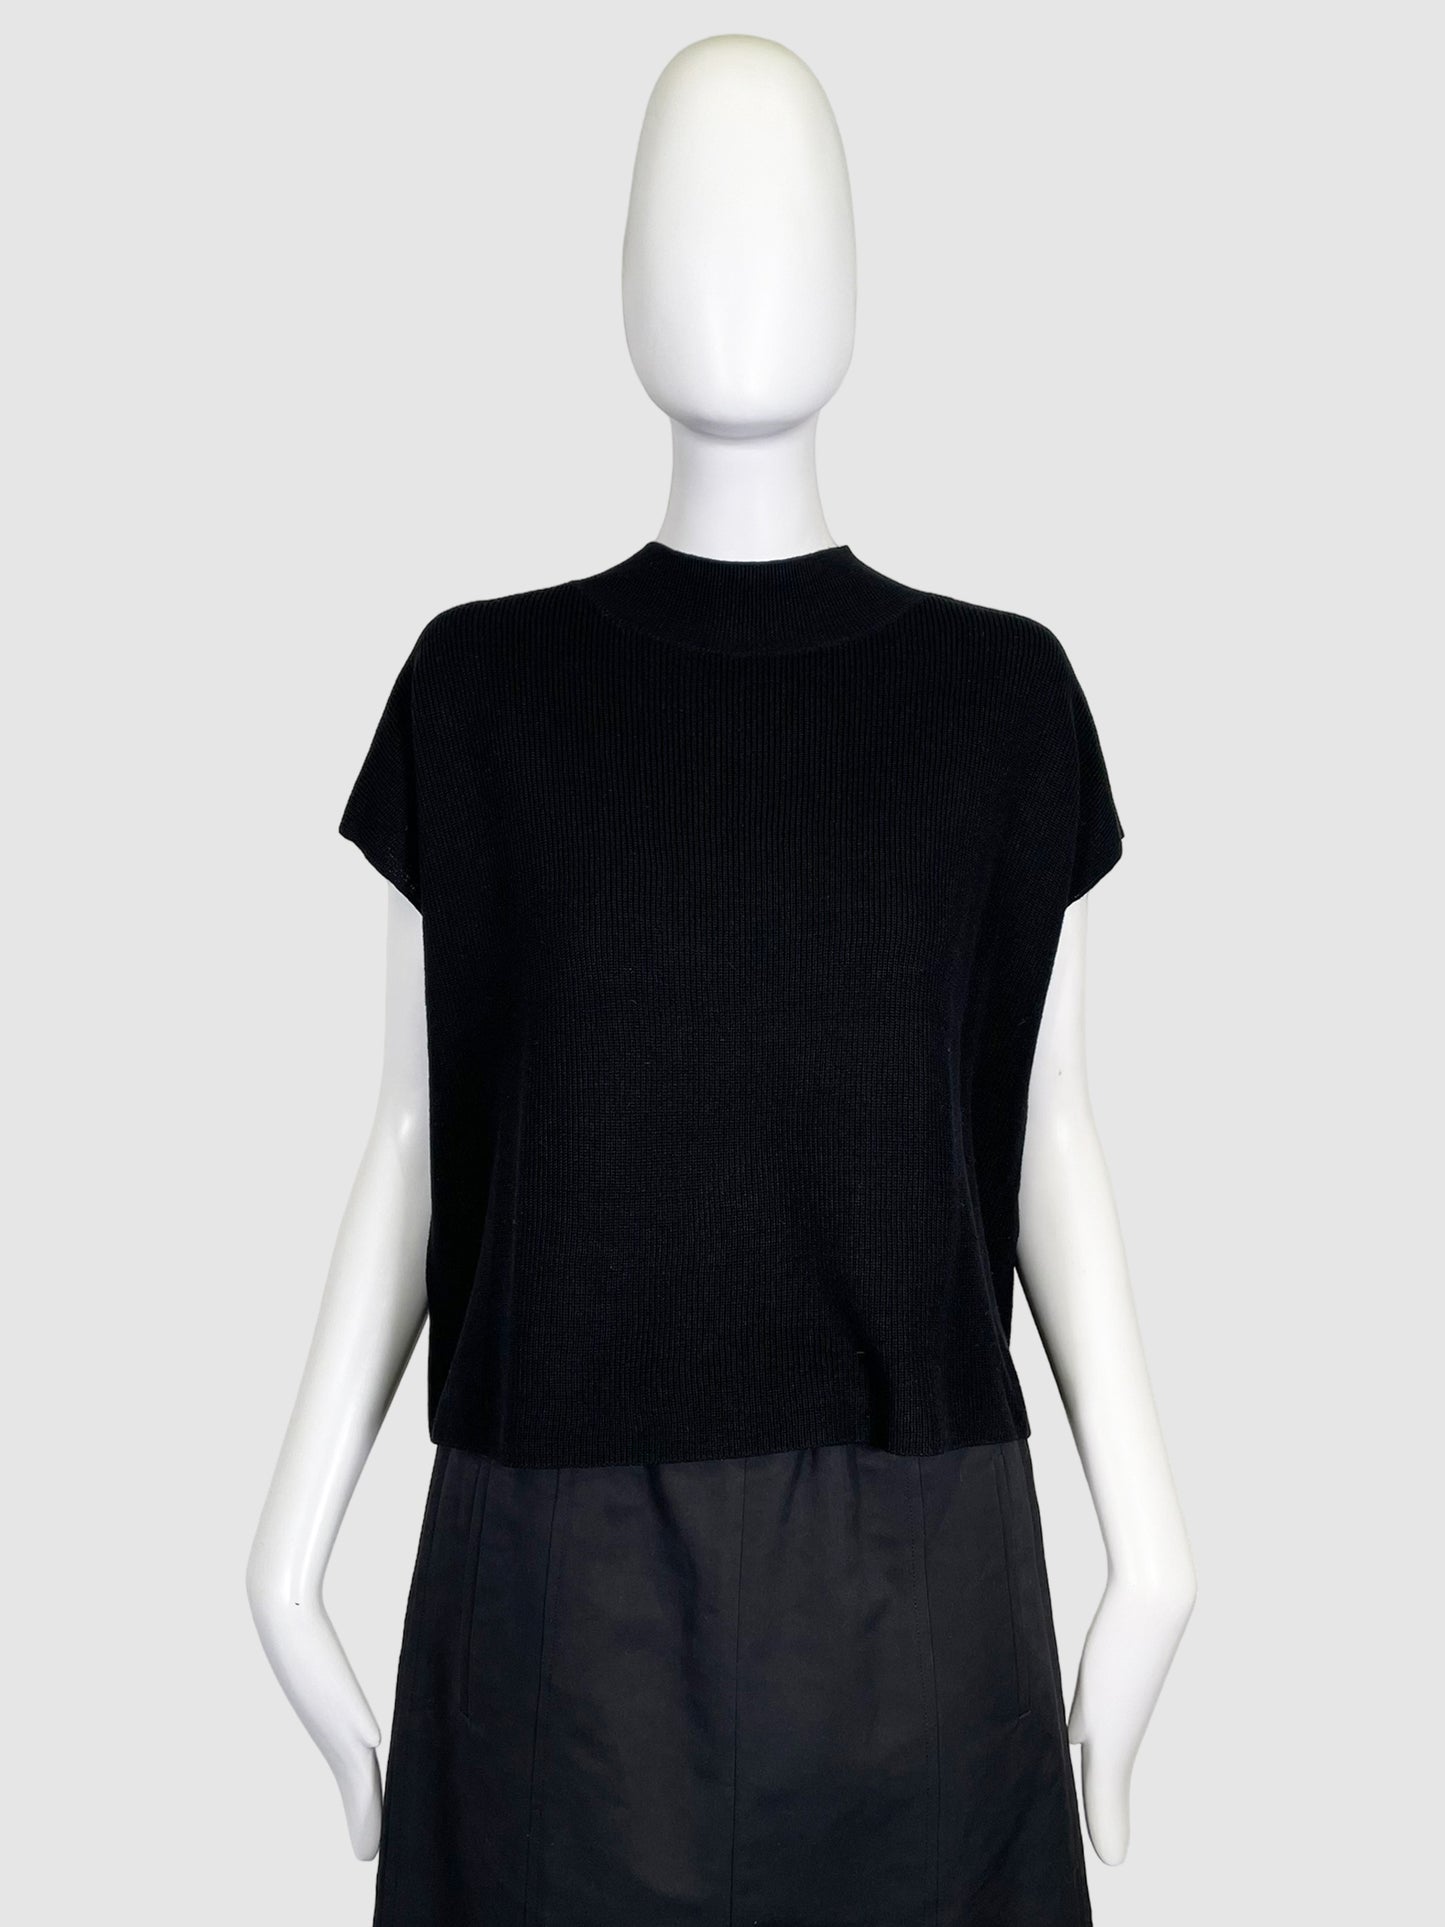 Eileen Fisher Black Knitted 2-piece set - Size M